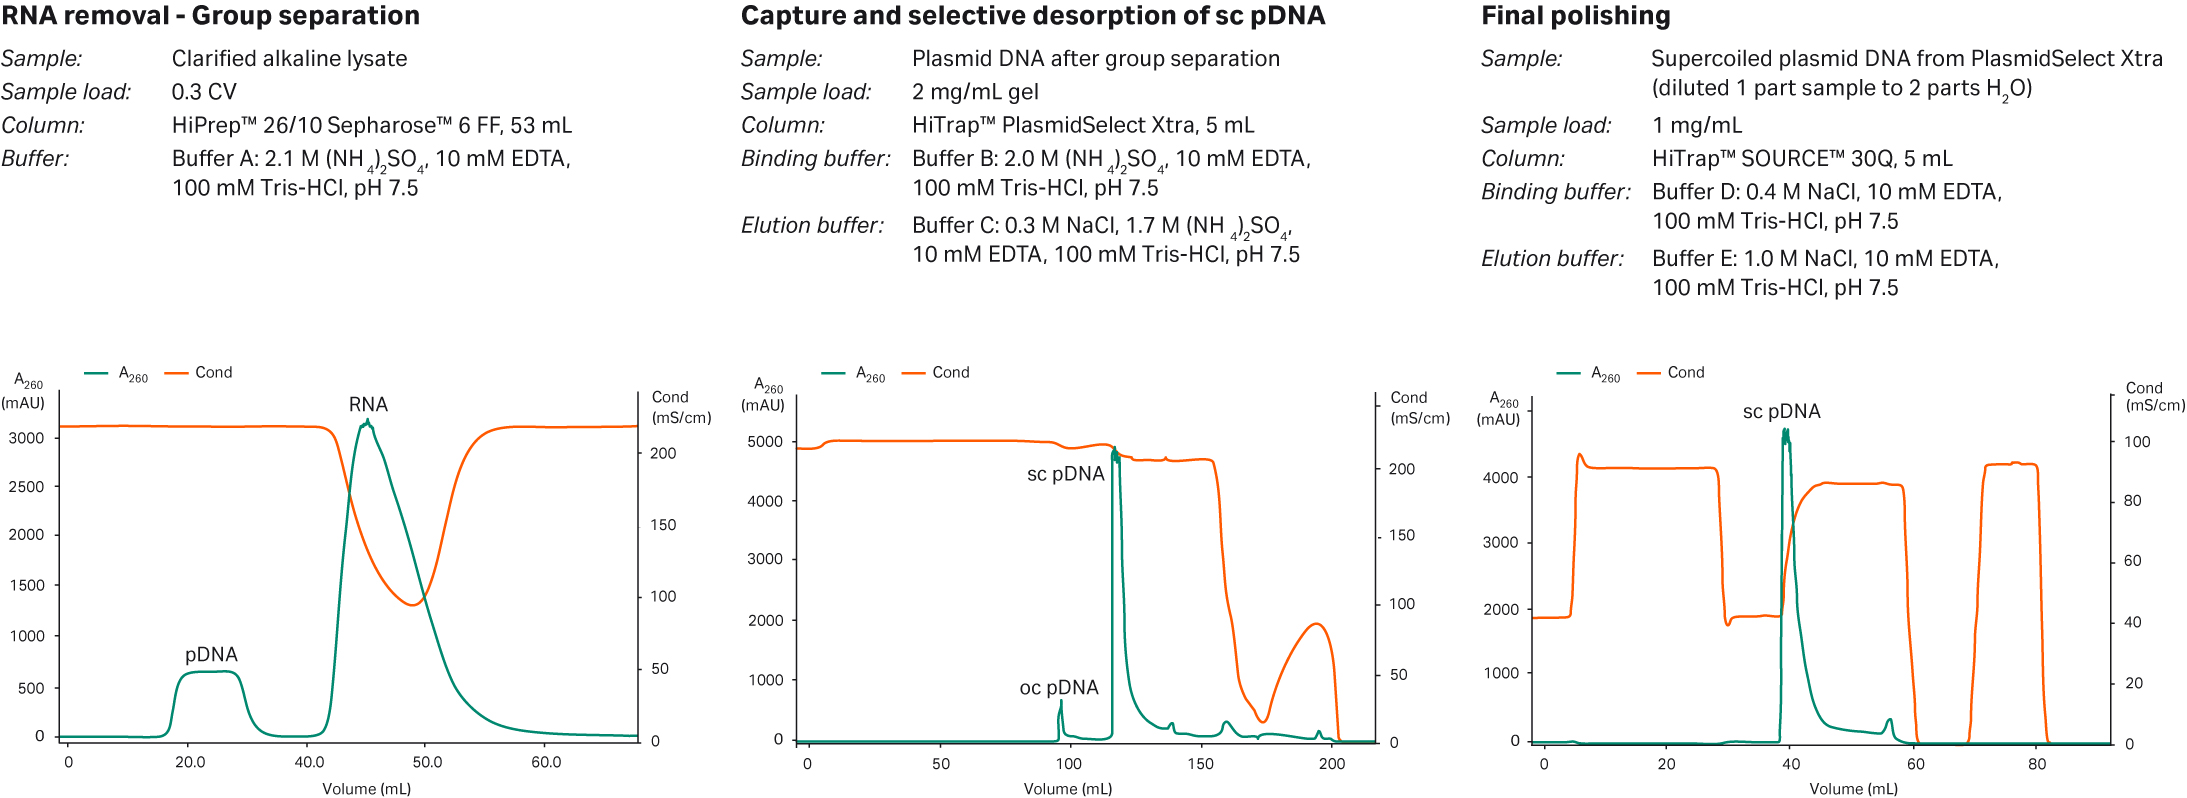 Purification of supercoiled plasmid DNA using the PlasmidSelect Xtra Starter Kit